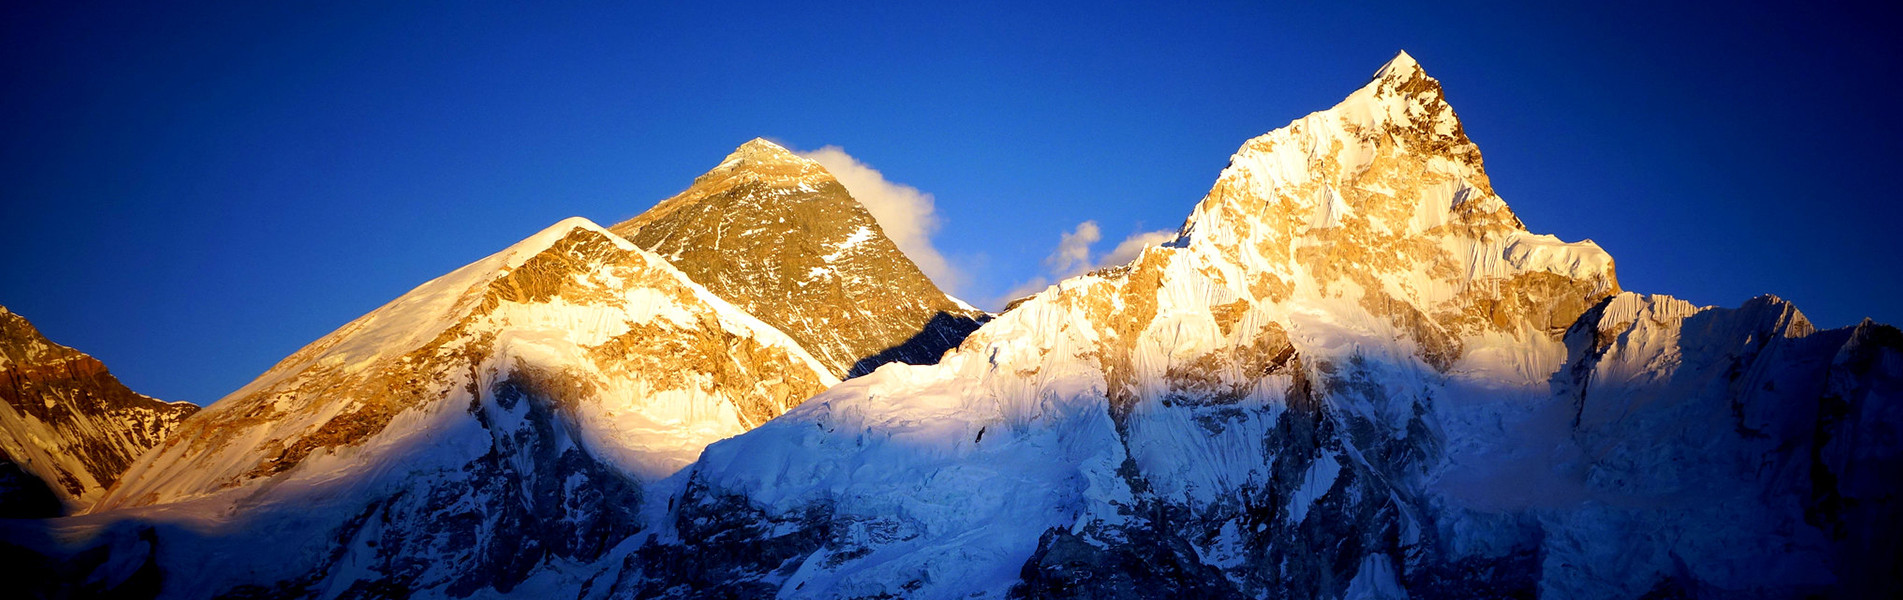 sunrise over Everest view from Kalapathar